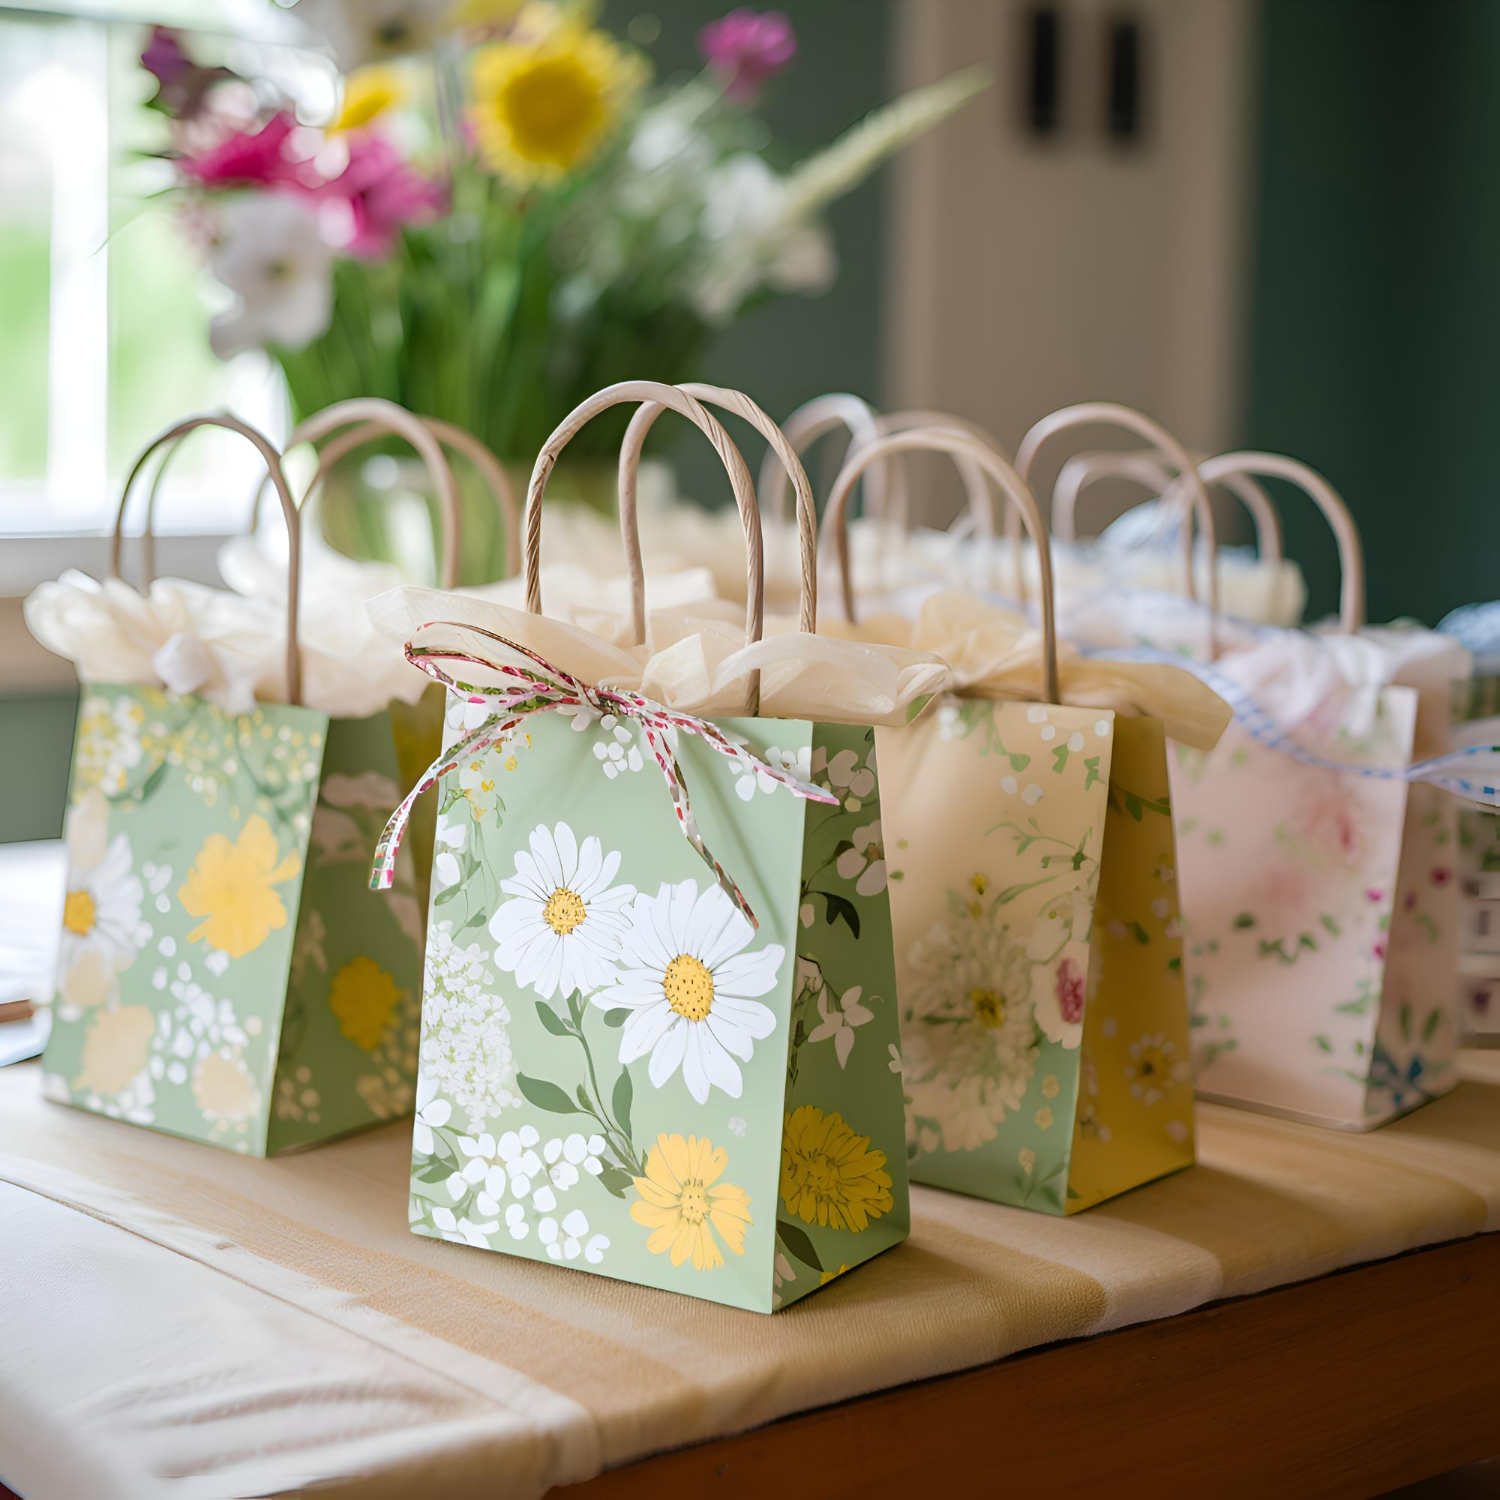 Floral gift bags for a baby shower on a table, with fresh flowers in the background